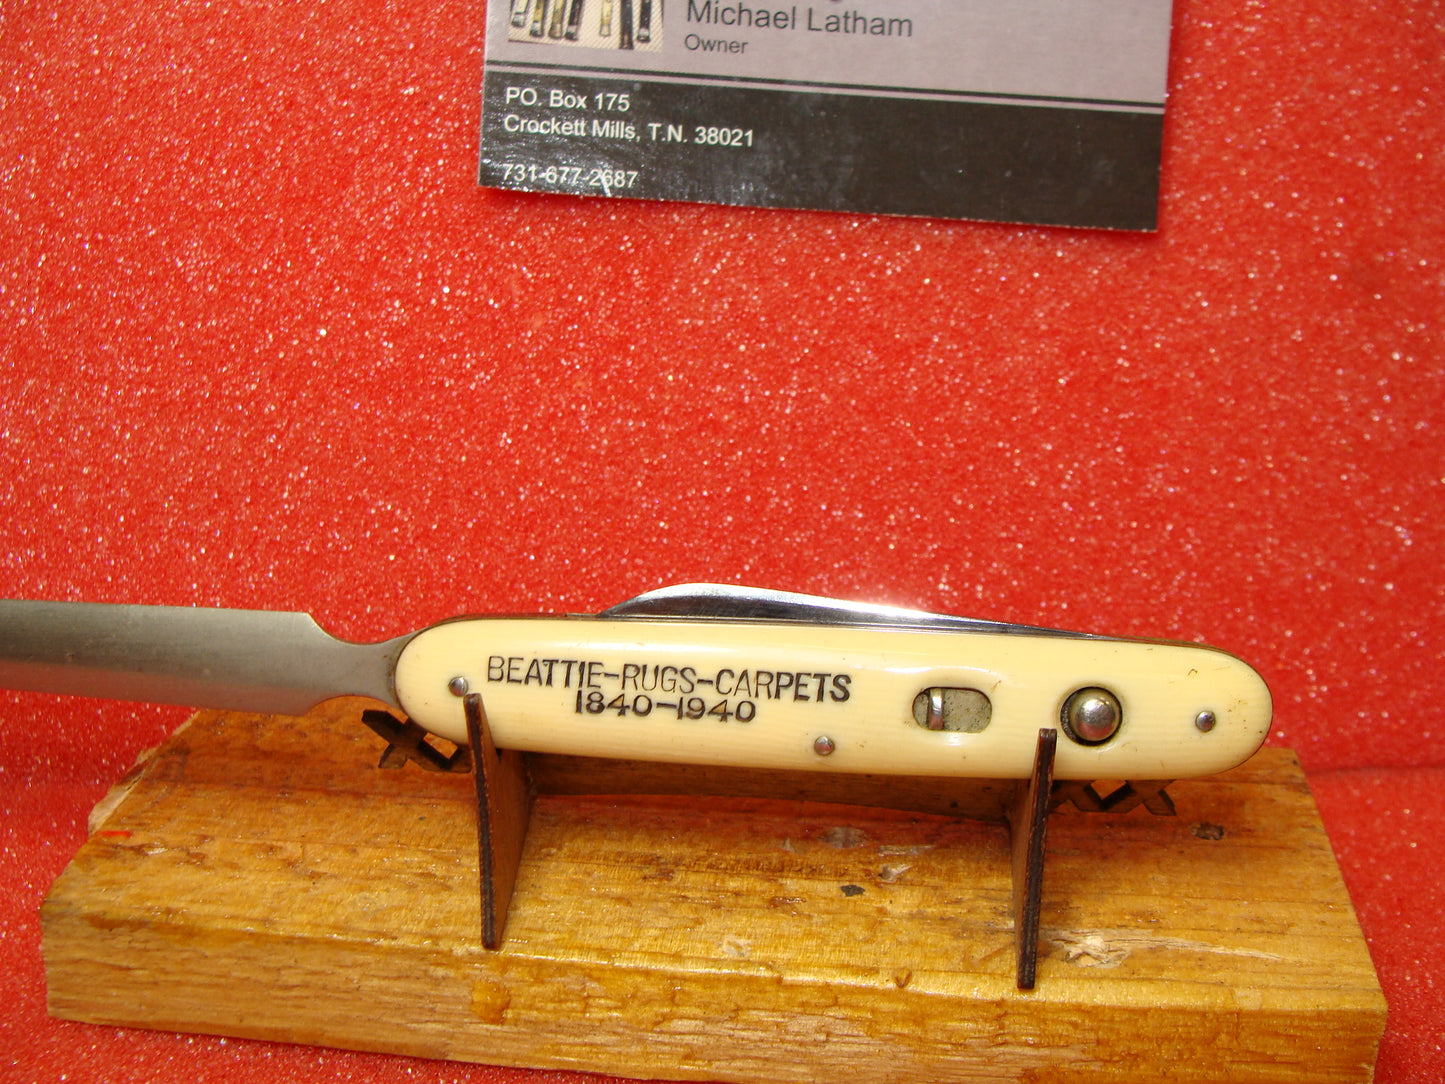 SCHRADE CUT CO. WALDEN NY 1916-46 VINTAGE AMERICAN AUTOMATIC KNIFE 3 3/8" SINGLE BLADE LETTER OPENER IMITATION IVORY CELLULOID HANDLES ETCHED BEATTIE-RUGS-CARPETS 1840-1940.